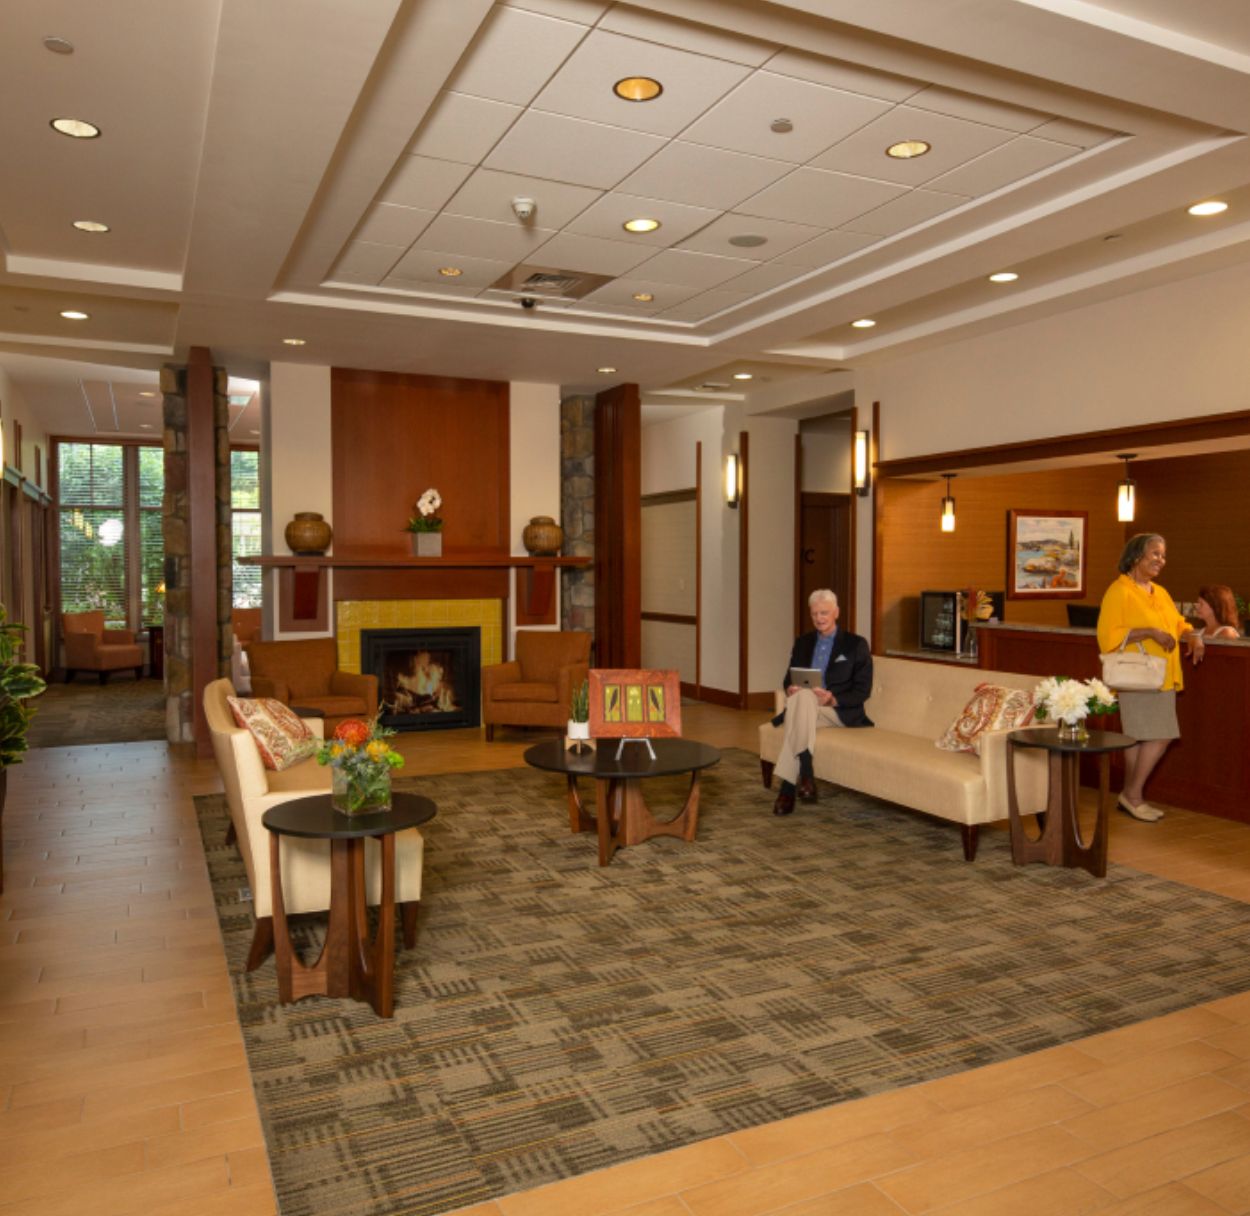 Senior living community interior at Waterstone At Welley, featuring elegant decor and furniture.